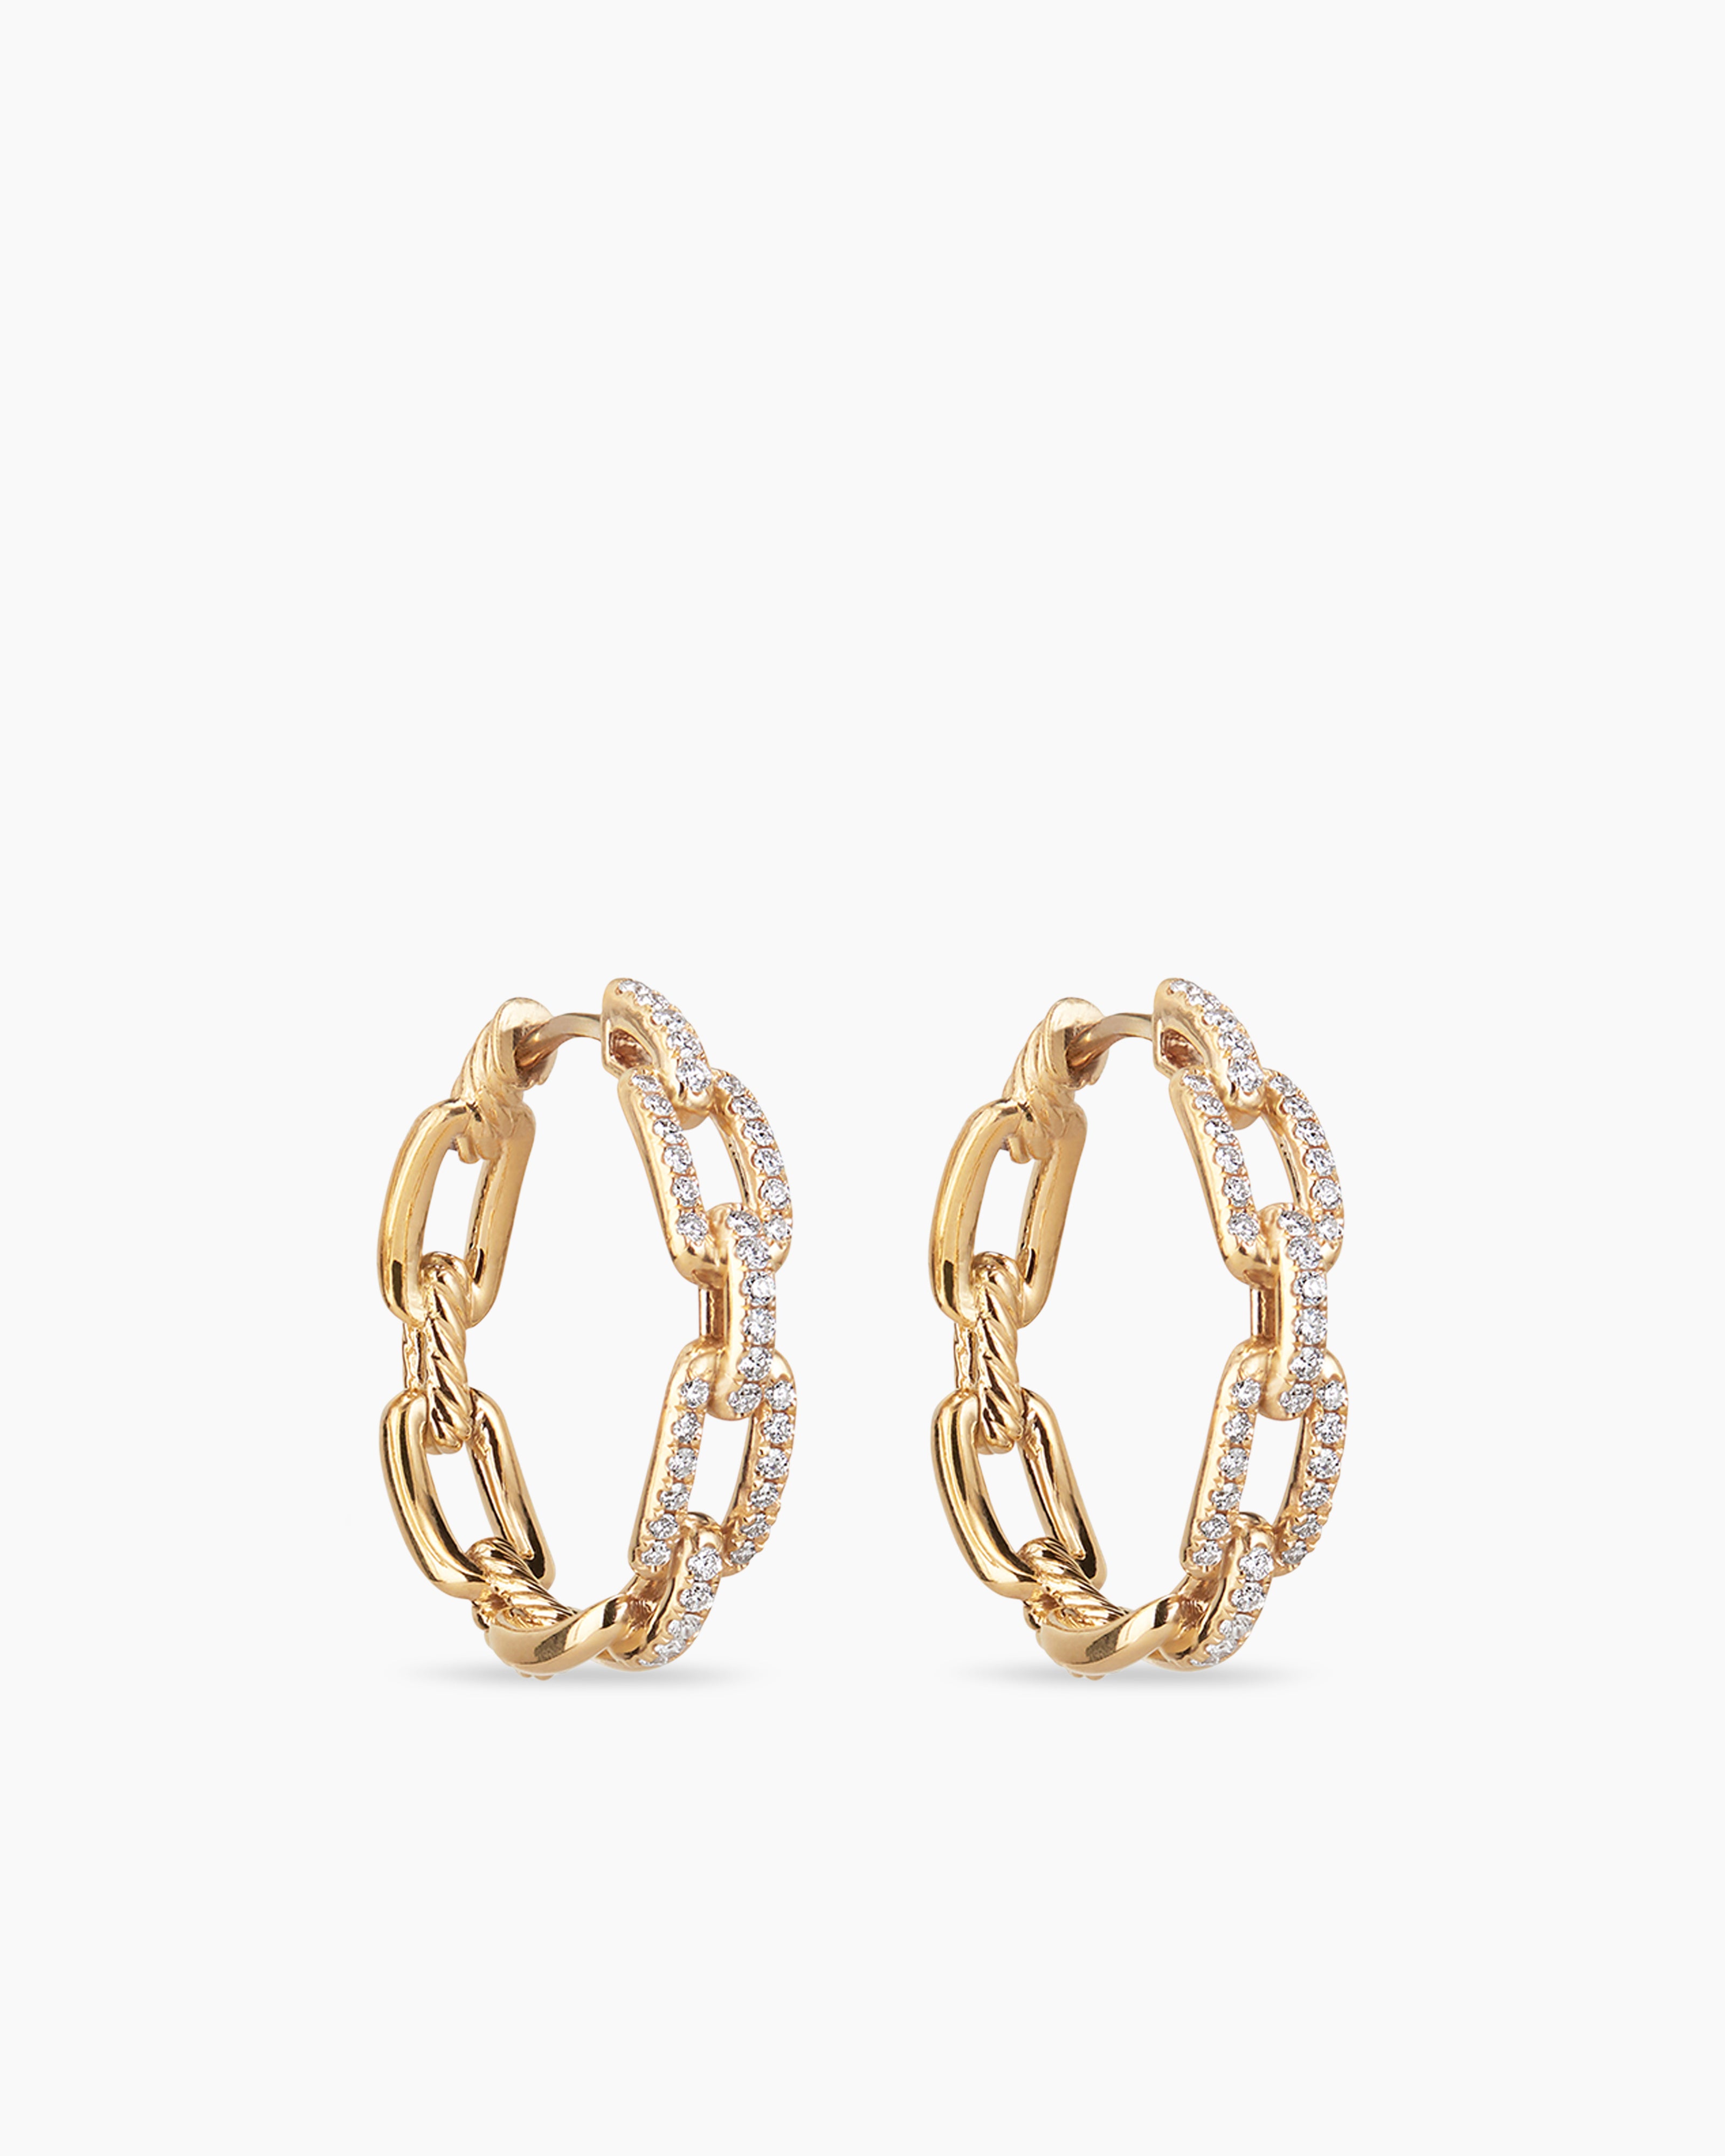 Stax Chain Link Hoop Earrings in 18K Yellow Gold with Diamonds